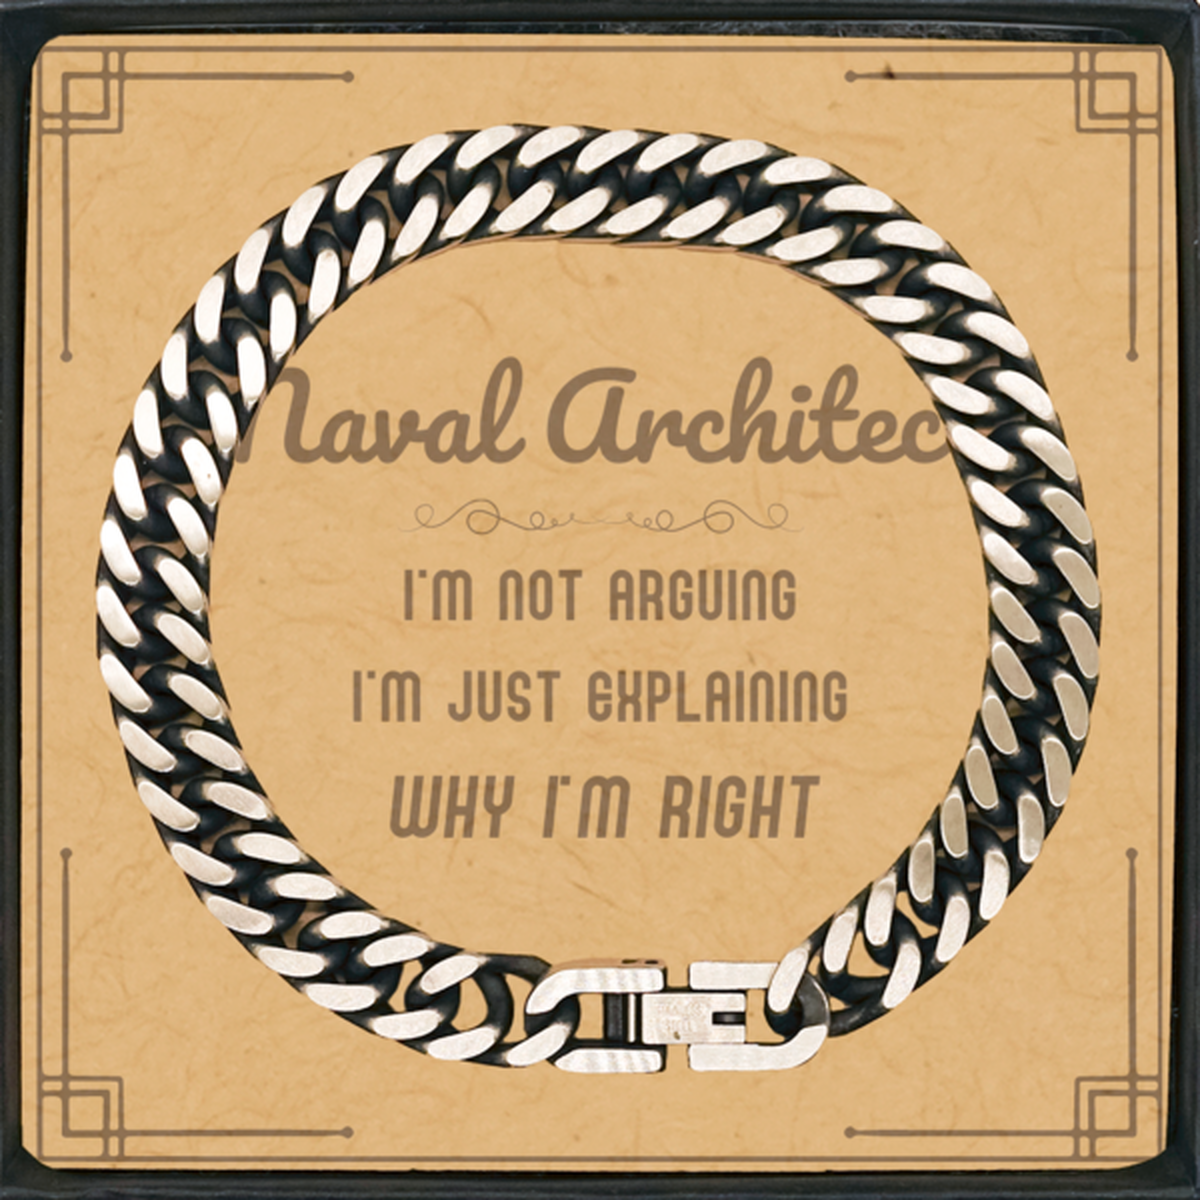 Naval Architect I'm not Arguing. I'm Just Explaining Why I'm RIGHT Cuban Link Chain Bracelet, Funny Saying Quote Naval Architect Gifts For Naval Architect Message Card Graduation Birthday Christmas Gifts for Men Women Coworker